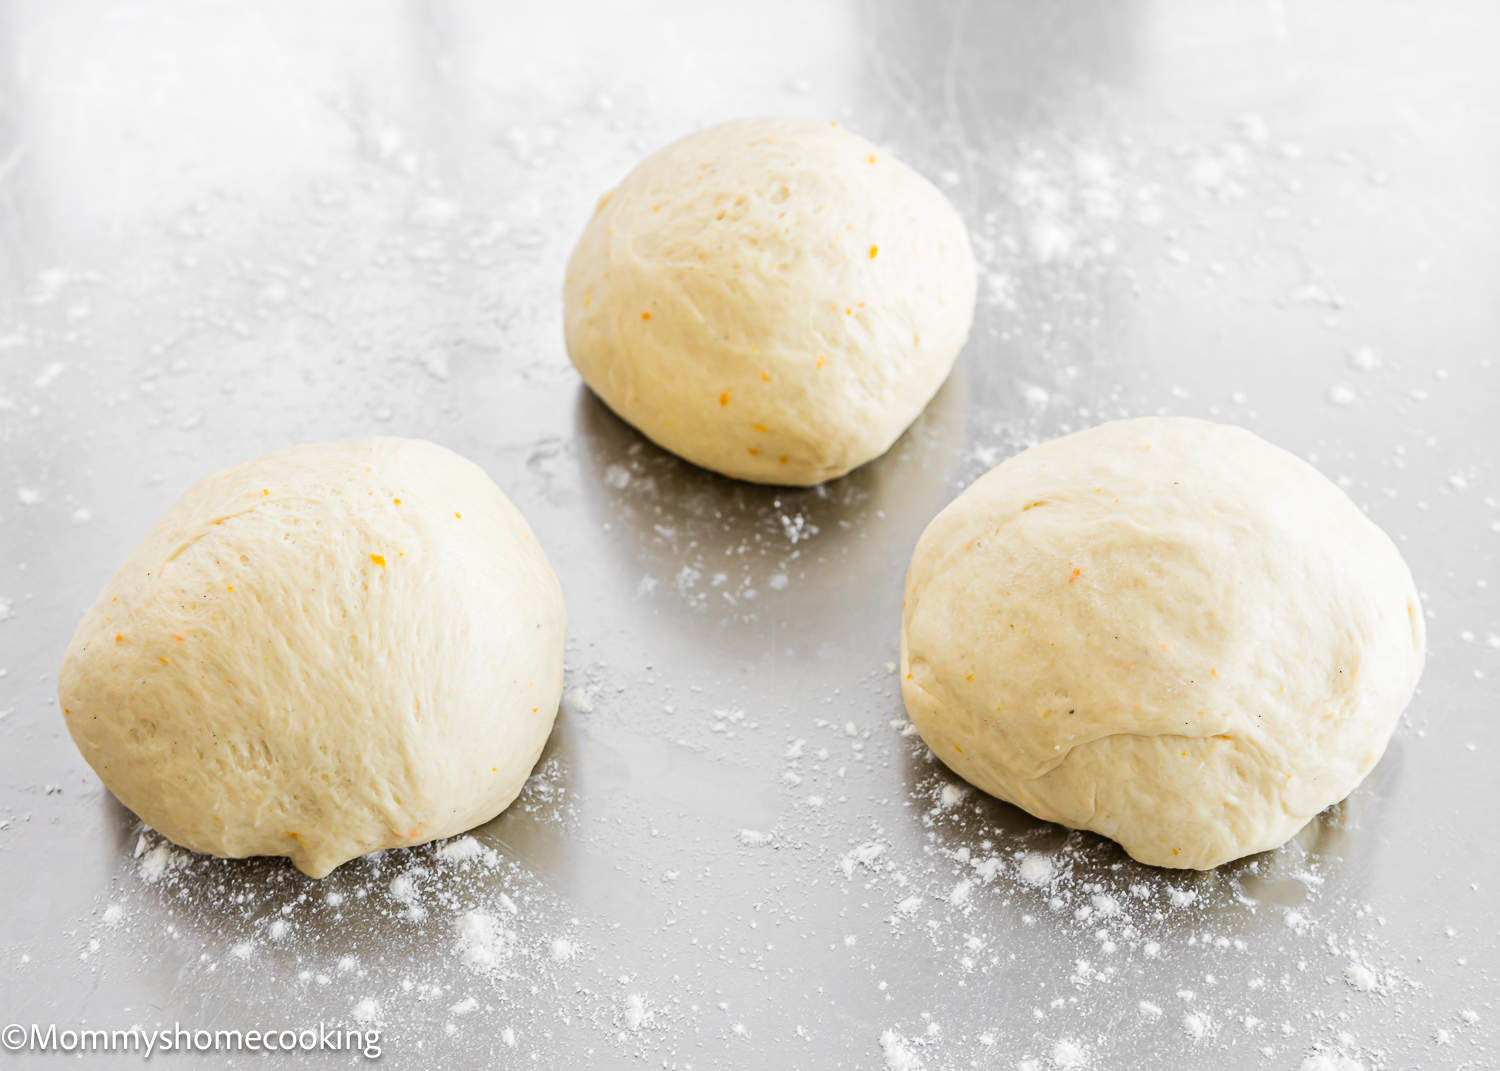 three portions of unbaked Easter Sweet Bread dough.